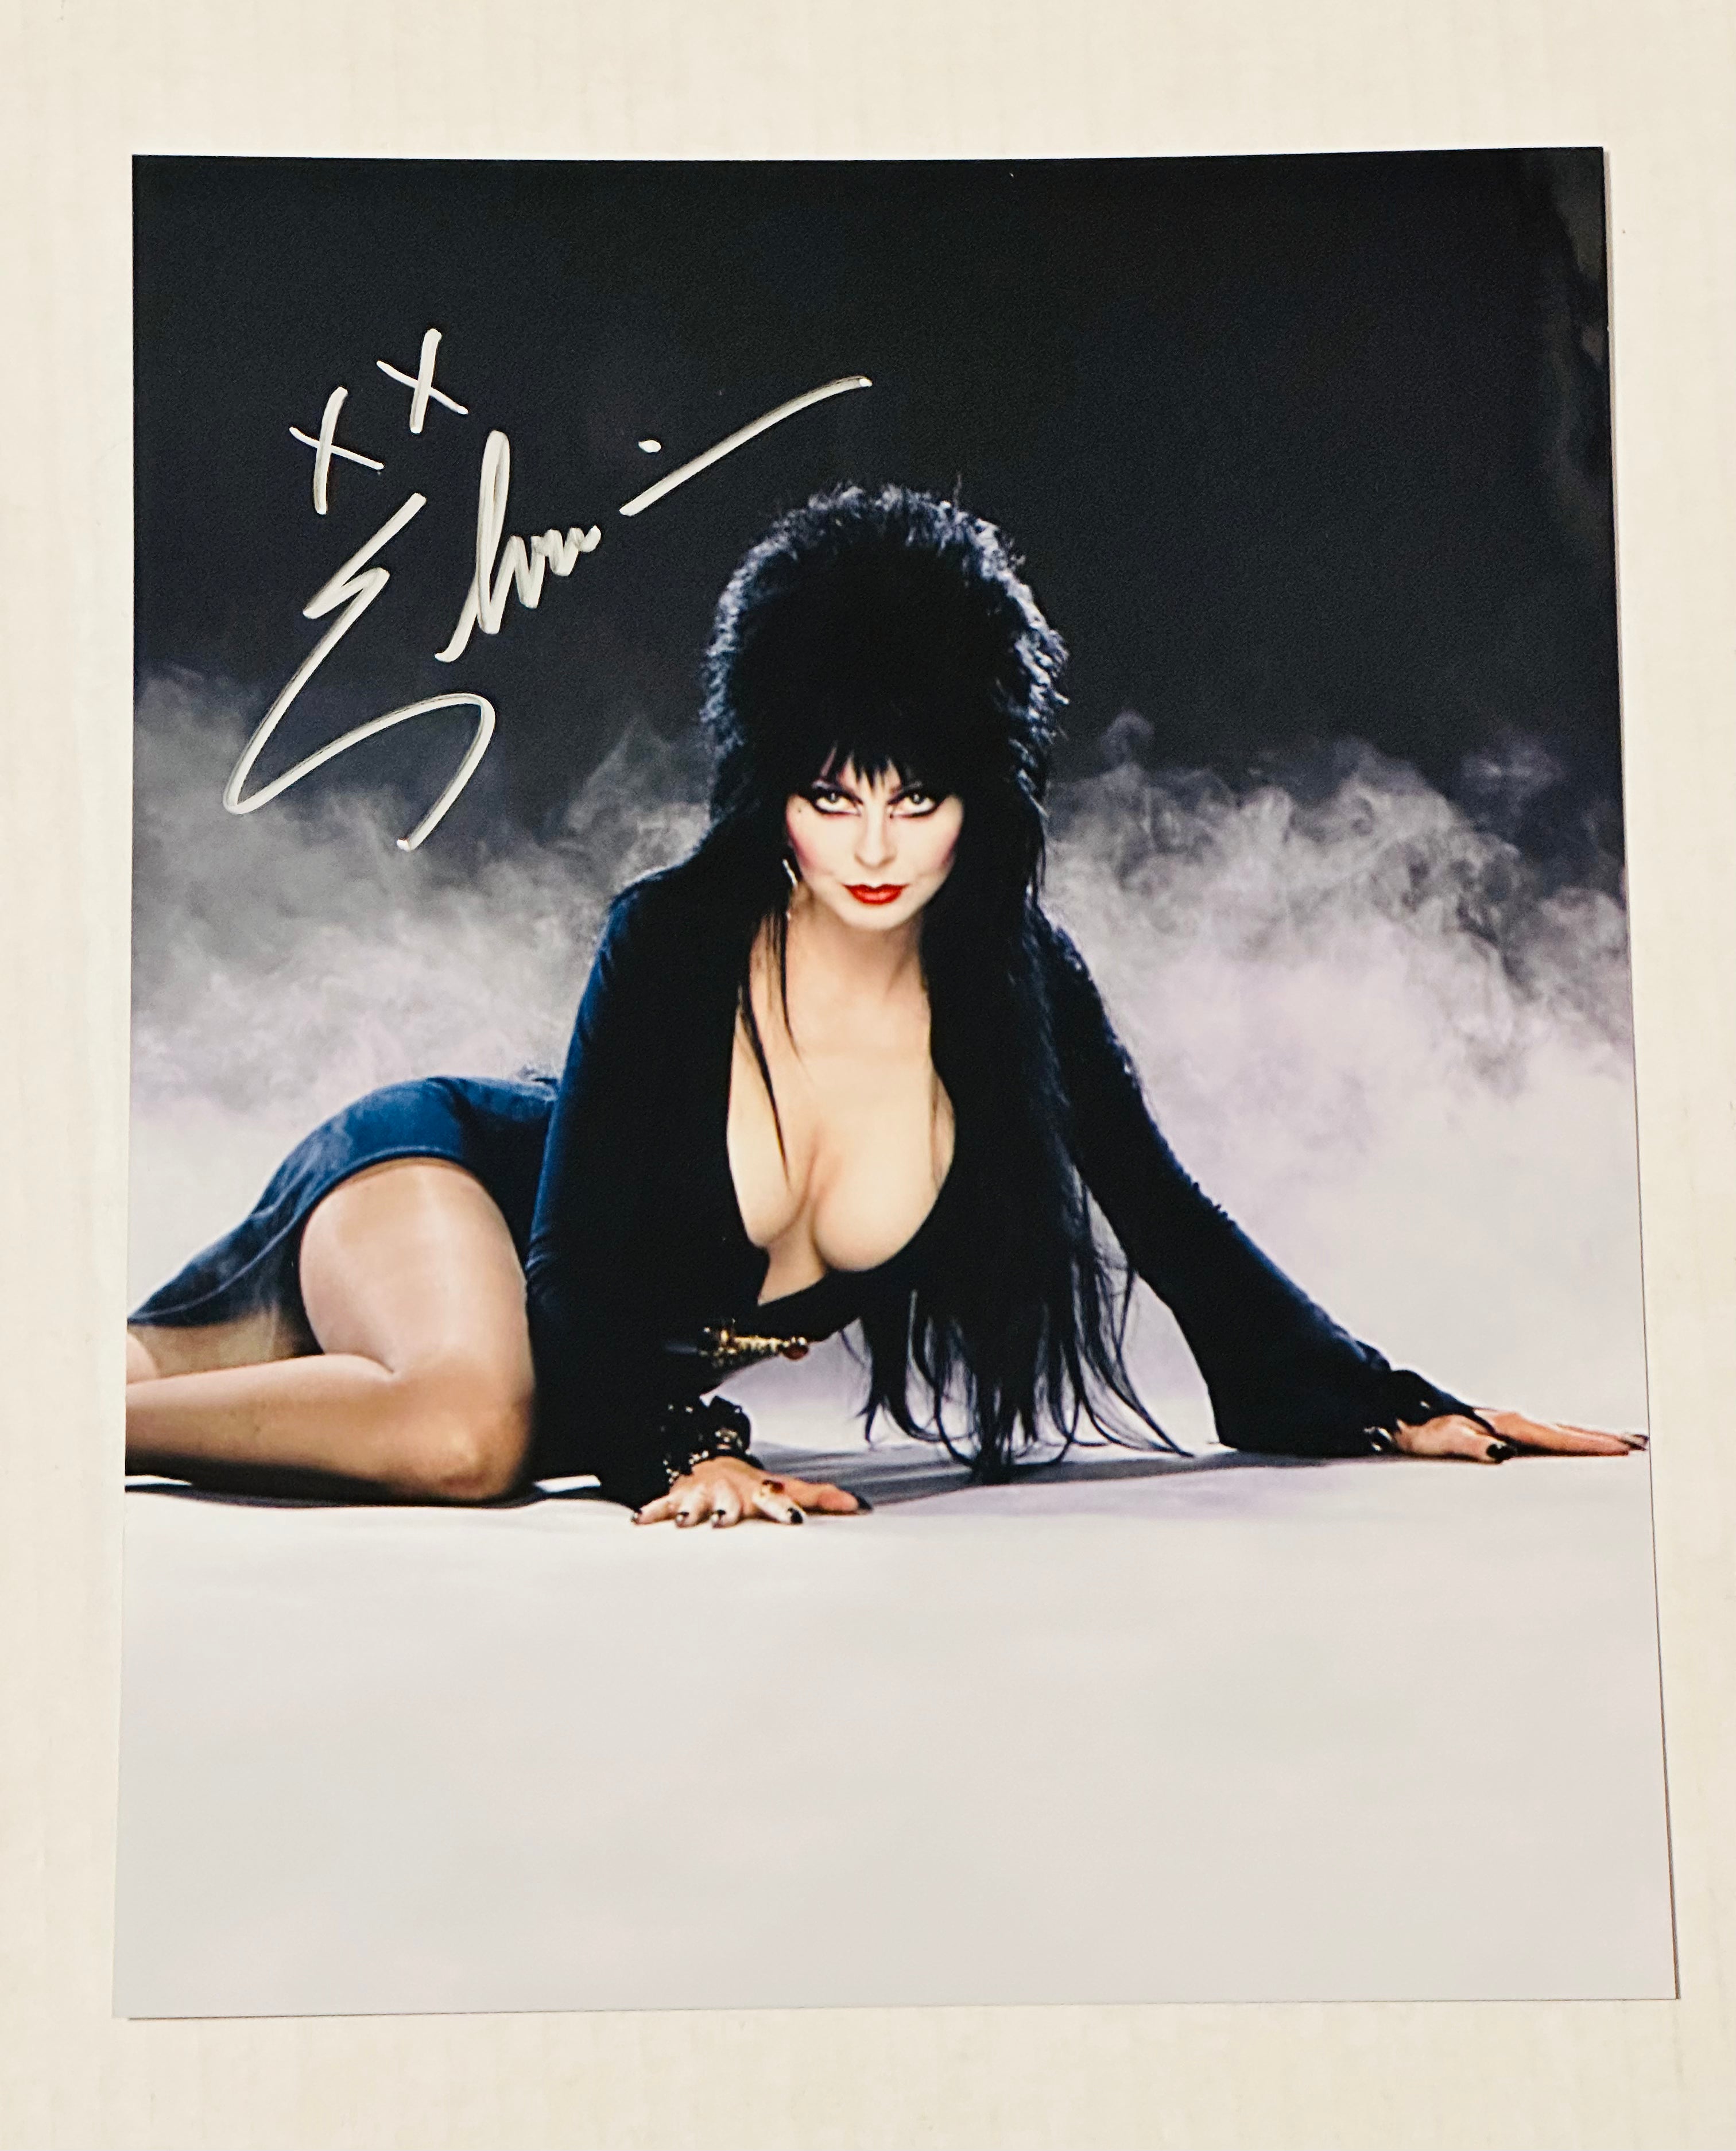 Elvira Mistress of the Dark rare signed in person 8x10 autograph photo certified by Fanexpo